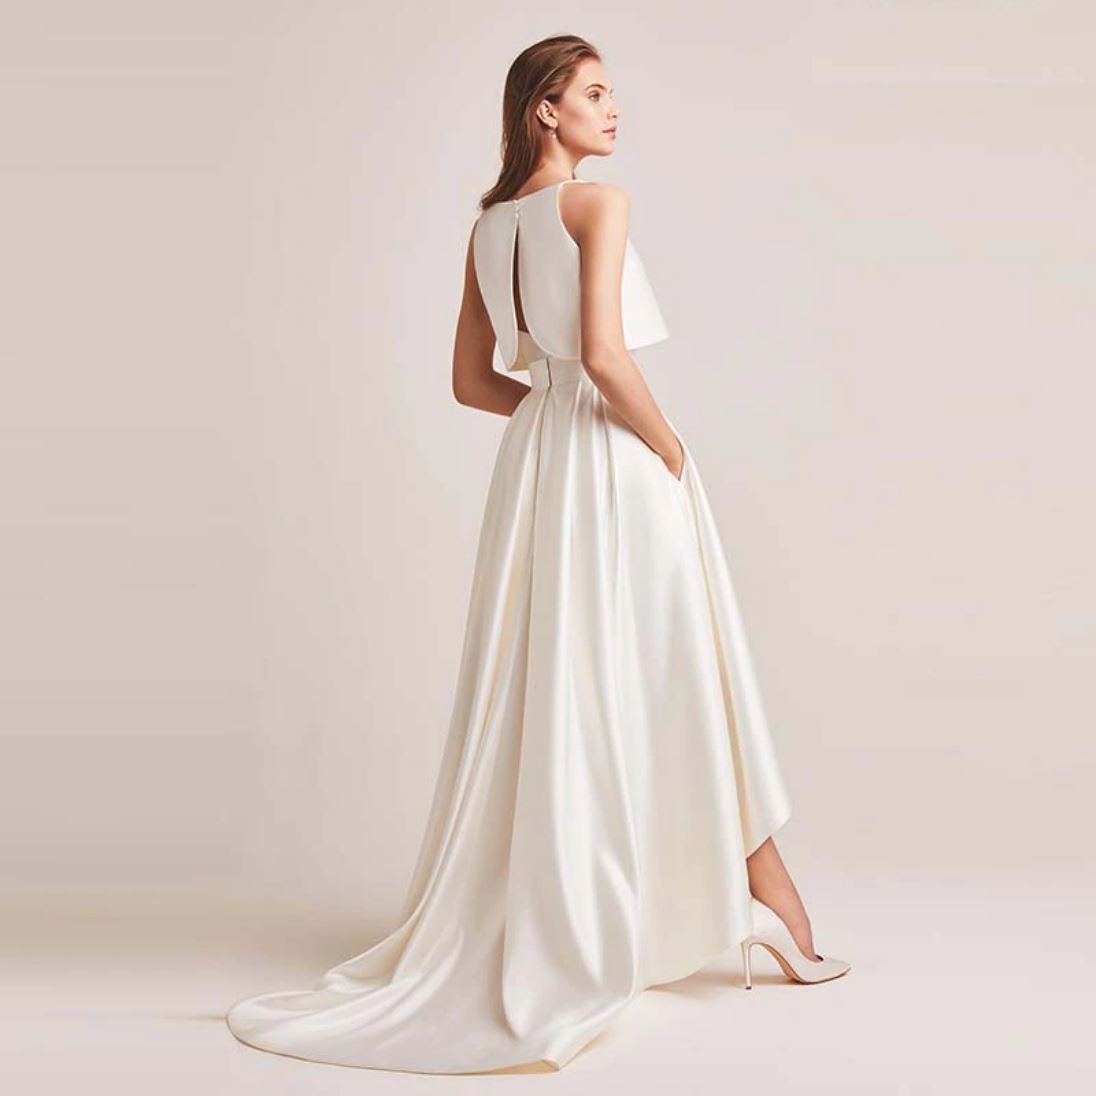 Satin High/Low with Jacket Floor-Length Bridal Gown Sexy Wedding Dresses BlissGown 